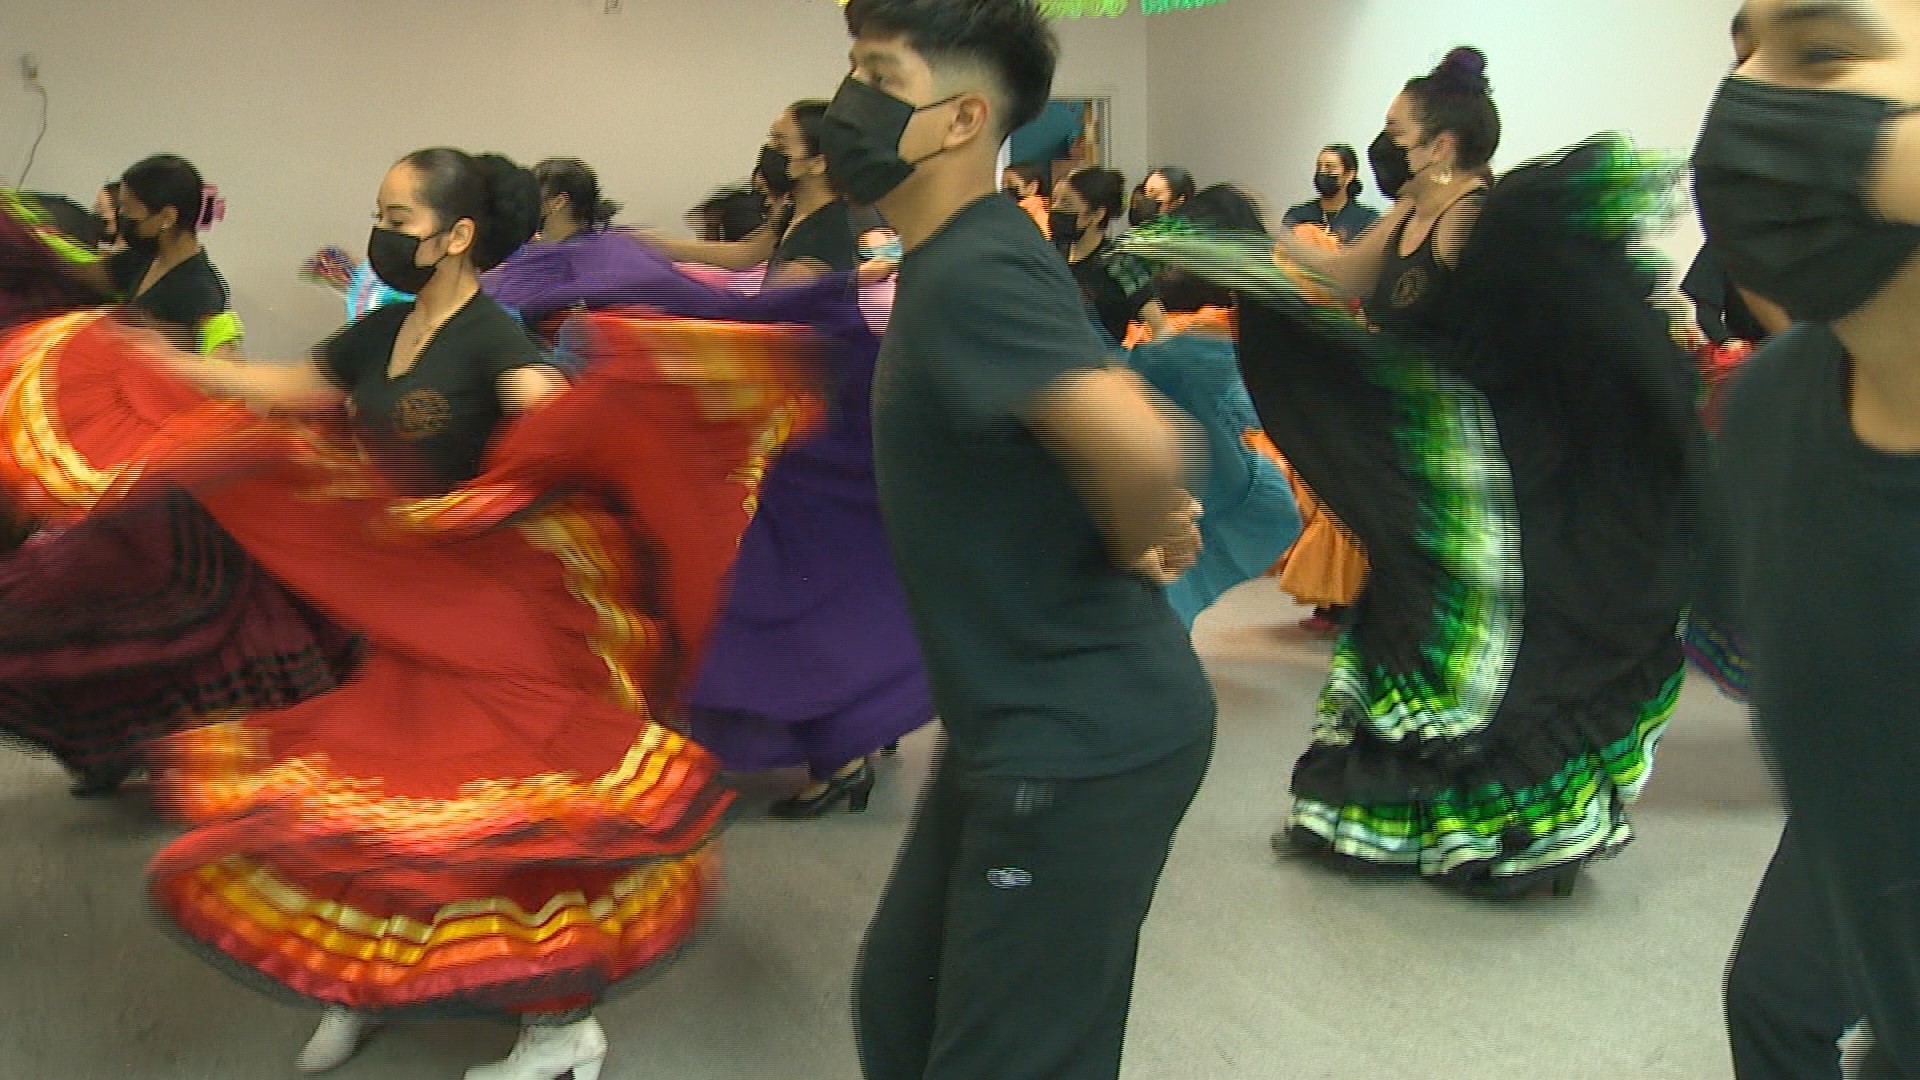 Rehearsals are about to culminate Wednesday, Oct. 25, on stage at the Moore Theatre in Seattle for a 50th anniversary celebration of Bailadores de Bronce.